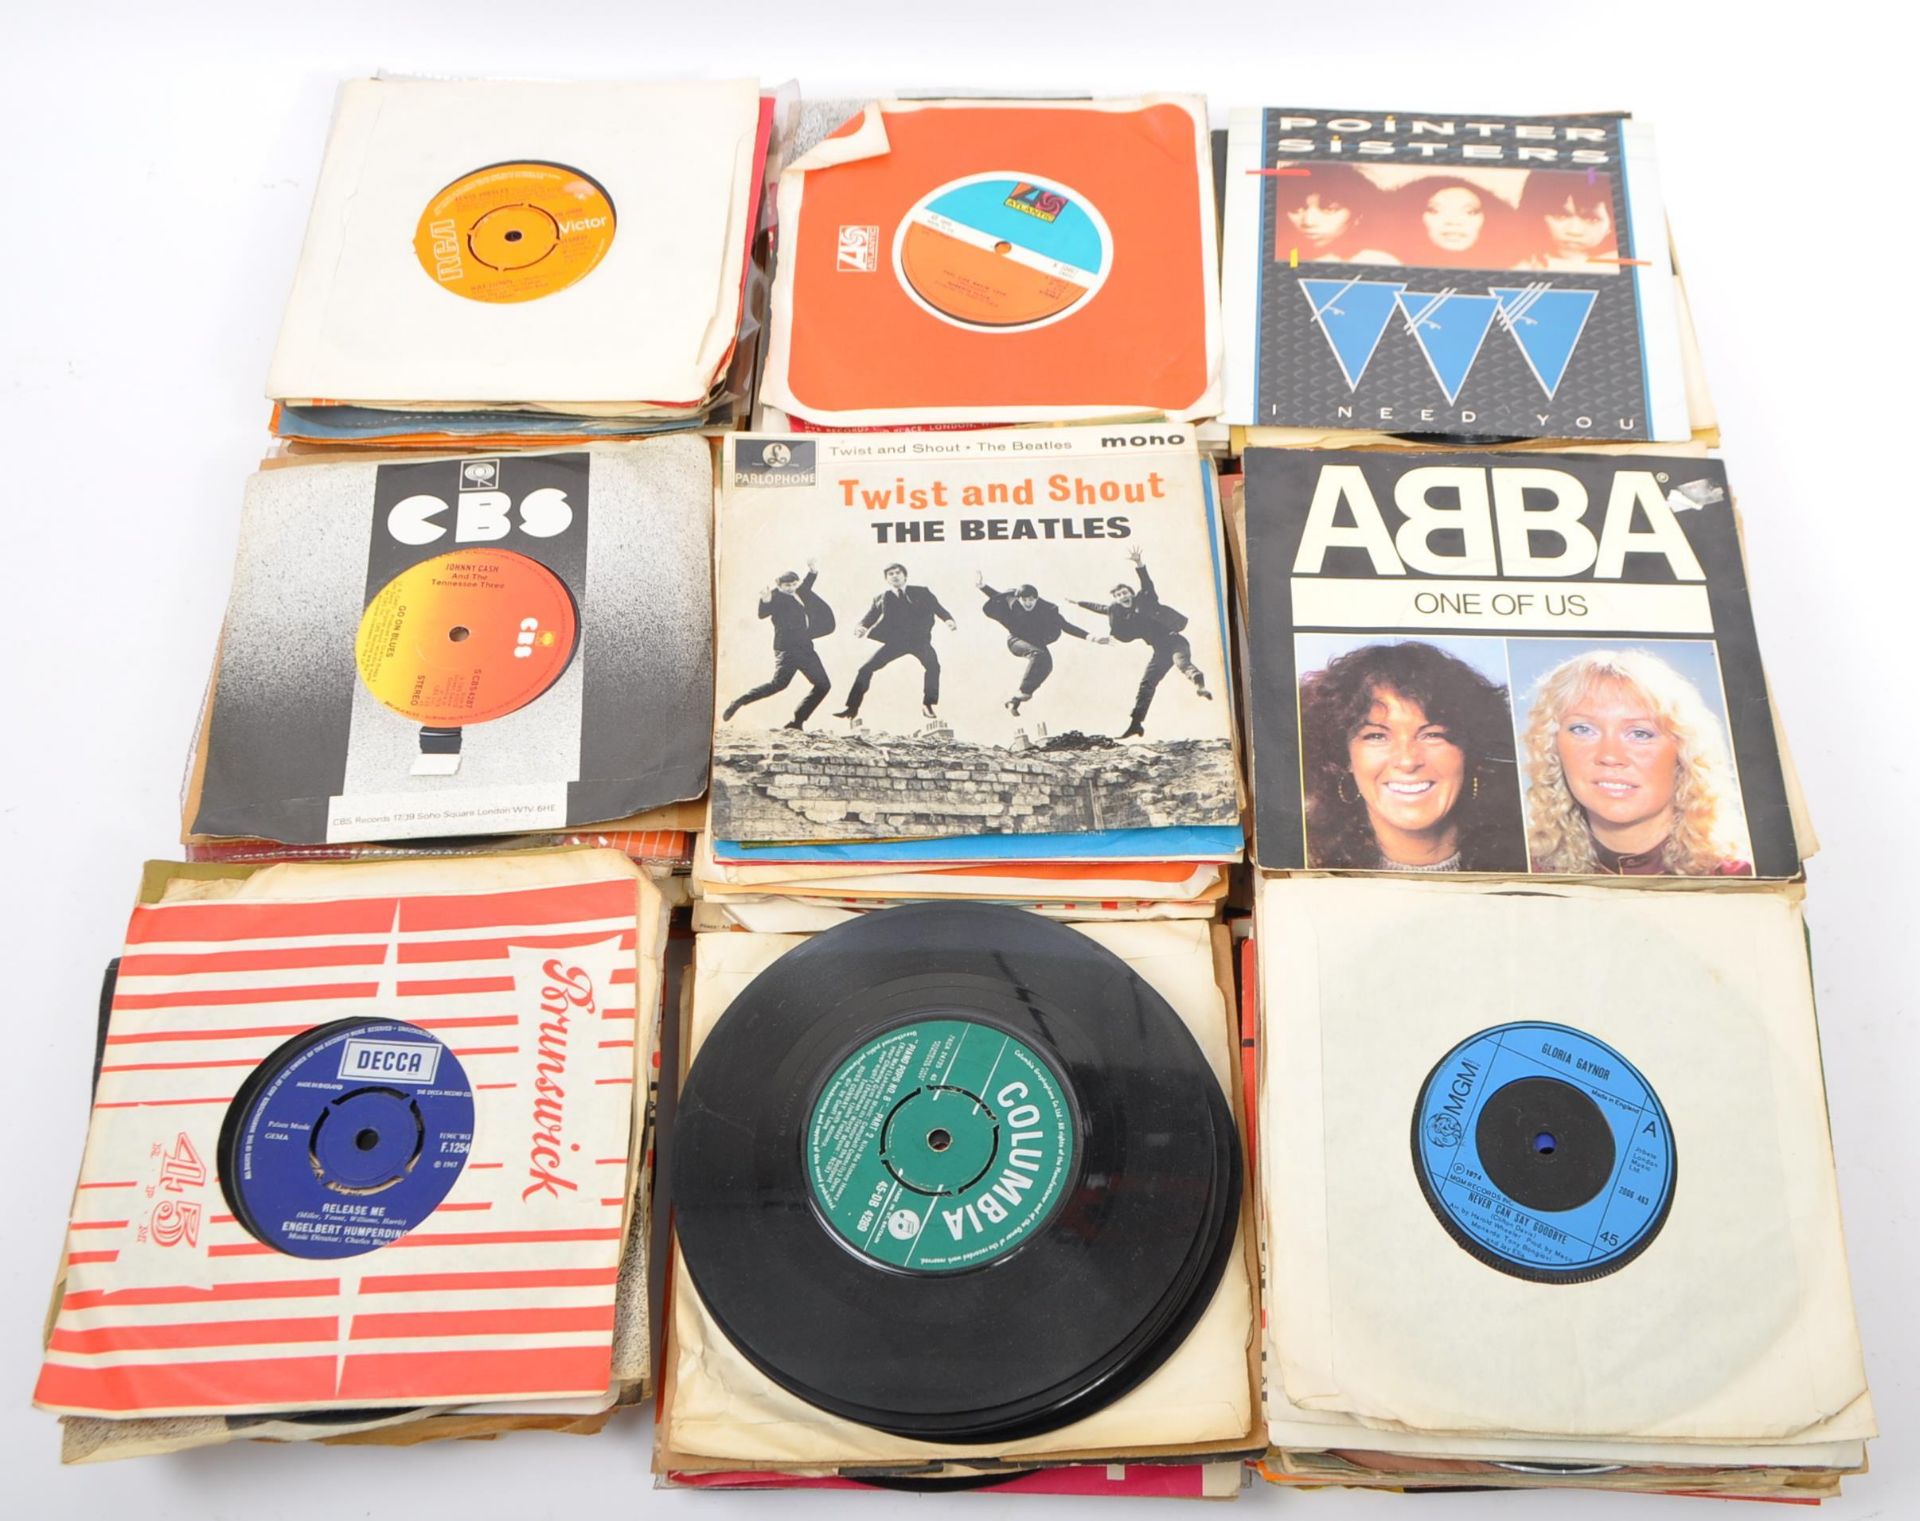 LARGE COLLECTION OF 45 RPM MUSIC VINYL RECORD SINGLES